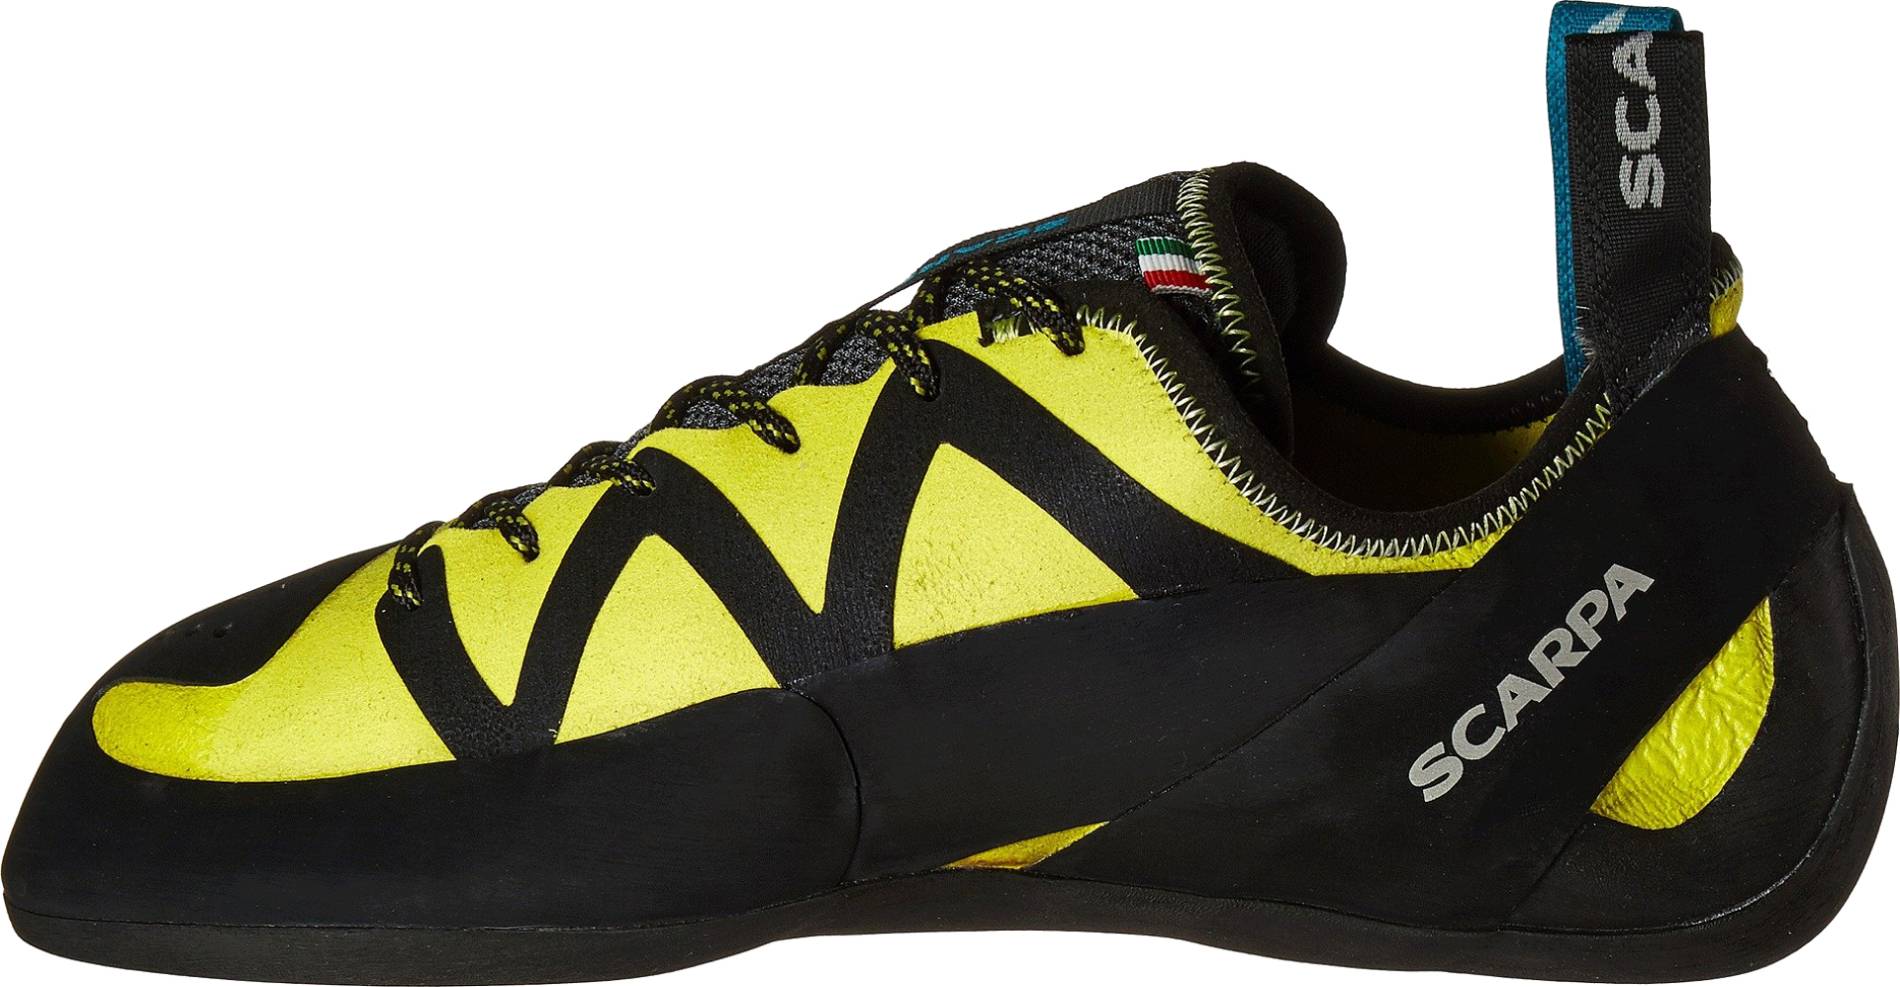 Save 36% on Scarpa Climbing Shoes (22 